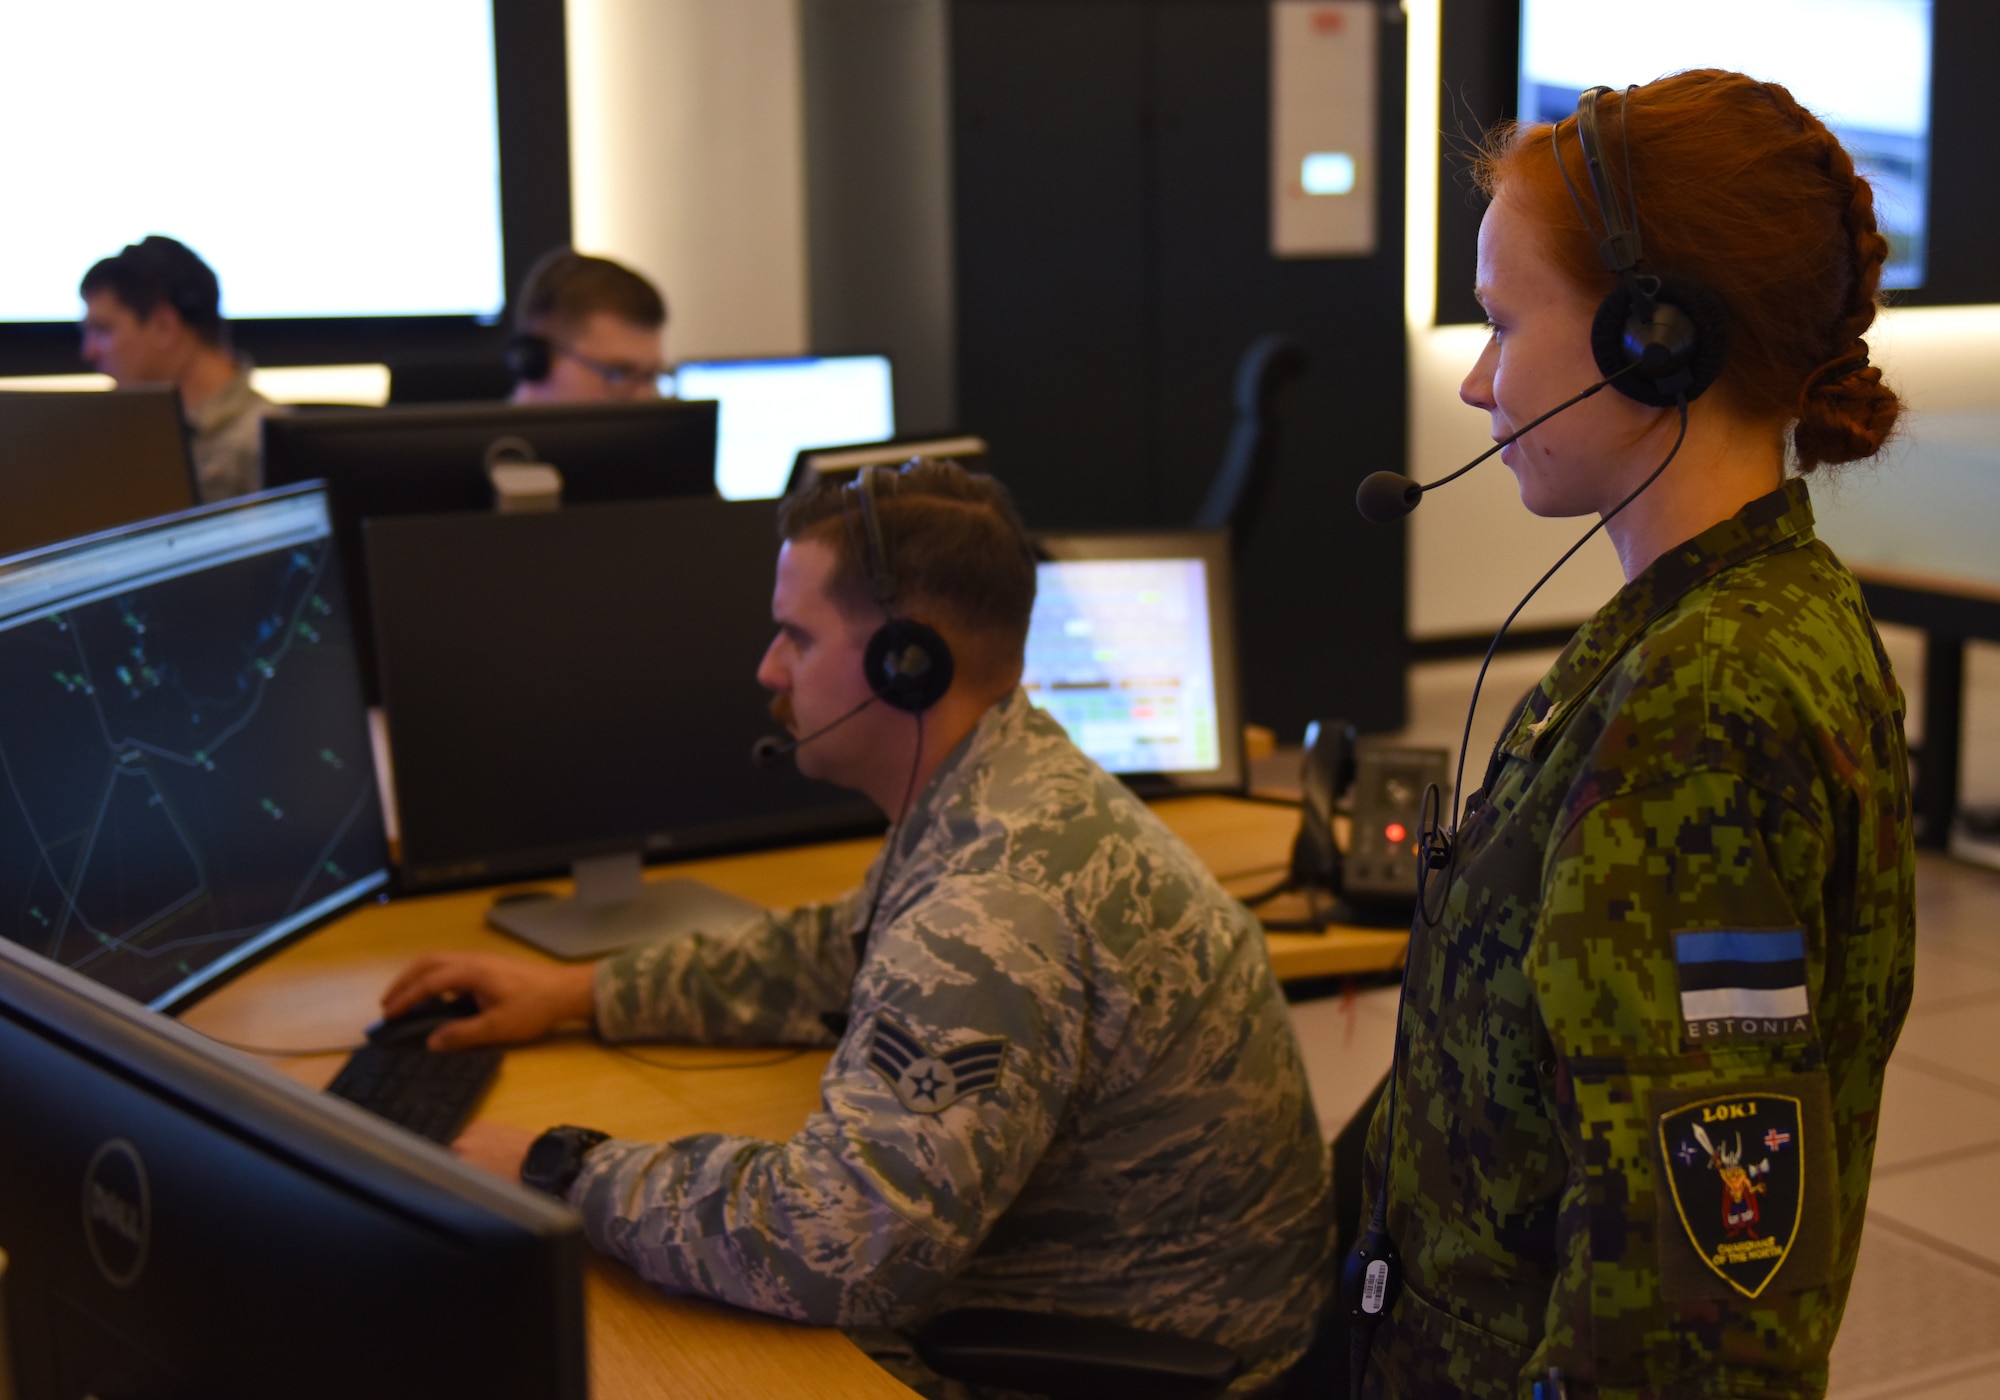 U.S. Air Force and Estonian military personnel work together in the Control and Reporting Center at Keflavik Air Base, Iceland, Aug. 3, 2018 in support of NATO’s Icelandic Air Surveillance mission. The CRC houses U.S. Airmen from the 606th Air Control Squadron from Aviano Air Base, Italy, personnel from the Estonian military and Icelandic Coast Guard members to watch the skies, dispatch an F-15 scramble should the need arise and aid the pilots with potential interception once they are in the air. (U.S. Air Force photo/Staff Sgt. Alex Fox Echols III)